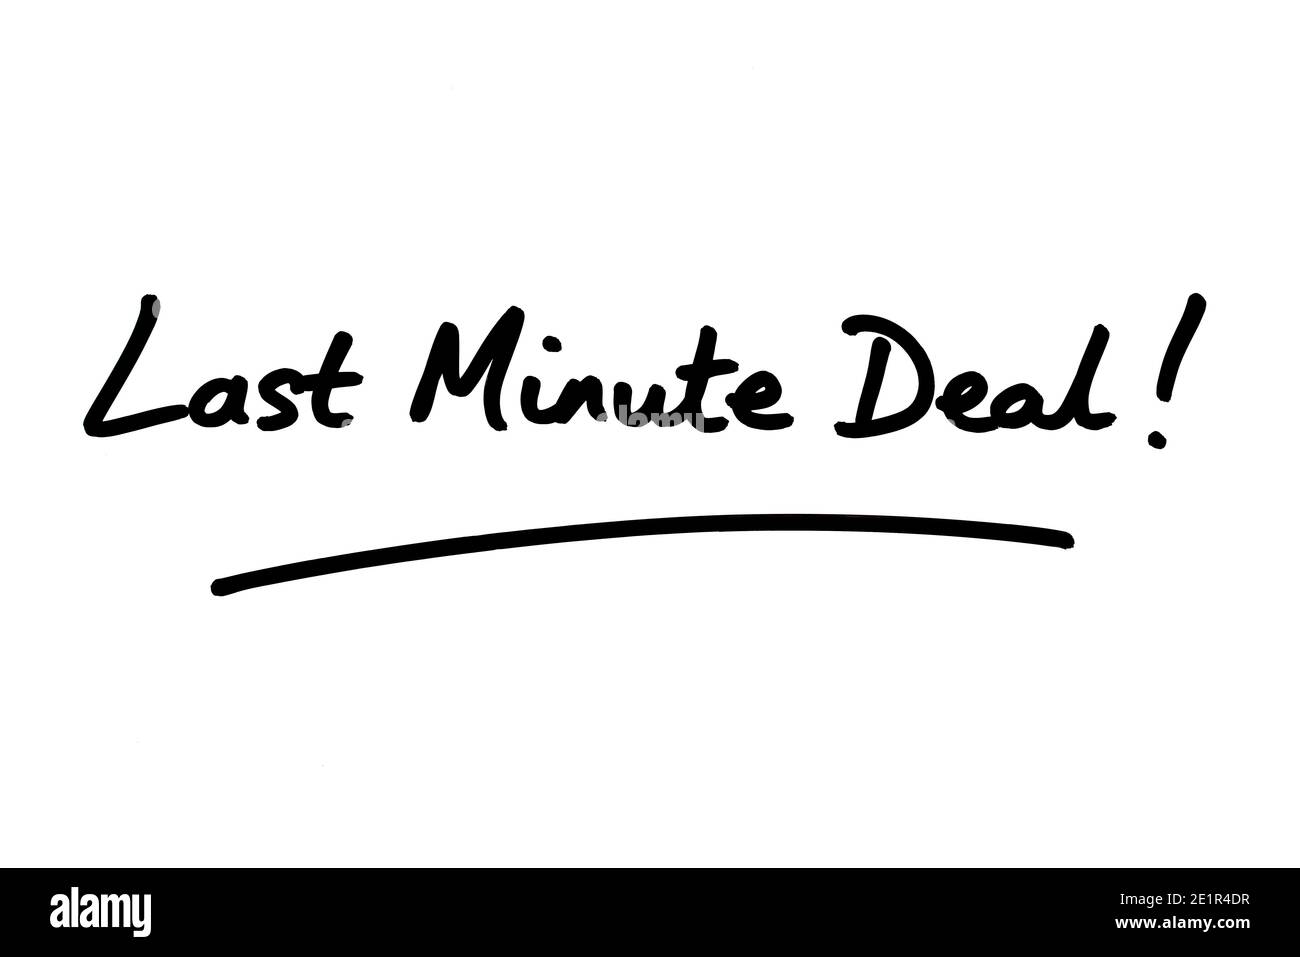 Last Minute Deal! handwritten on a white background. Stock Photo